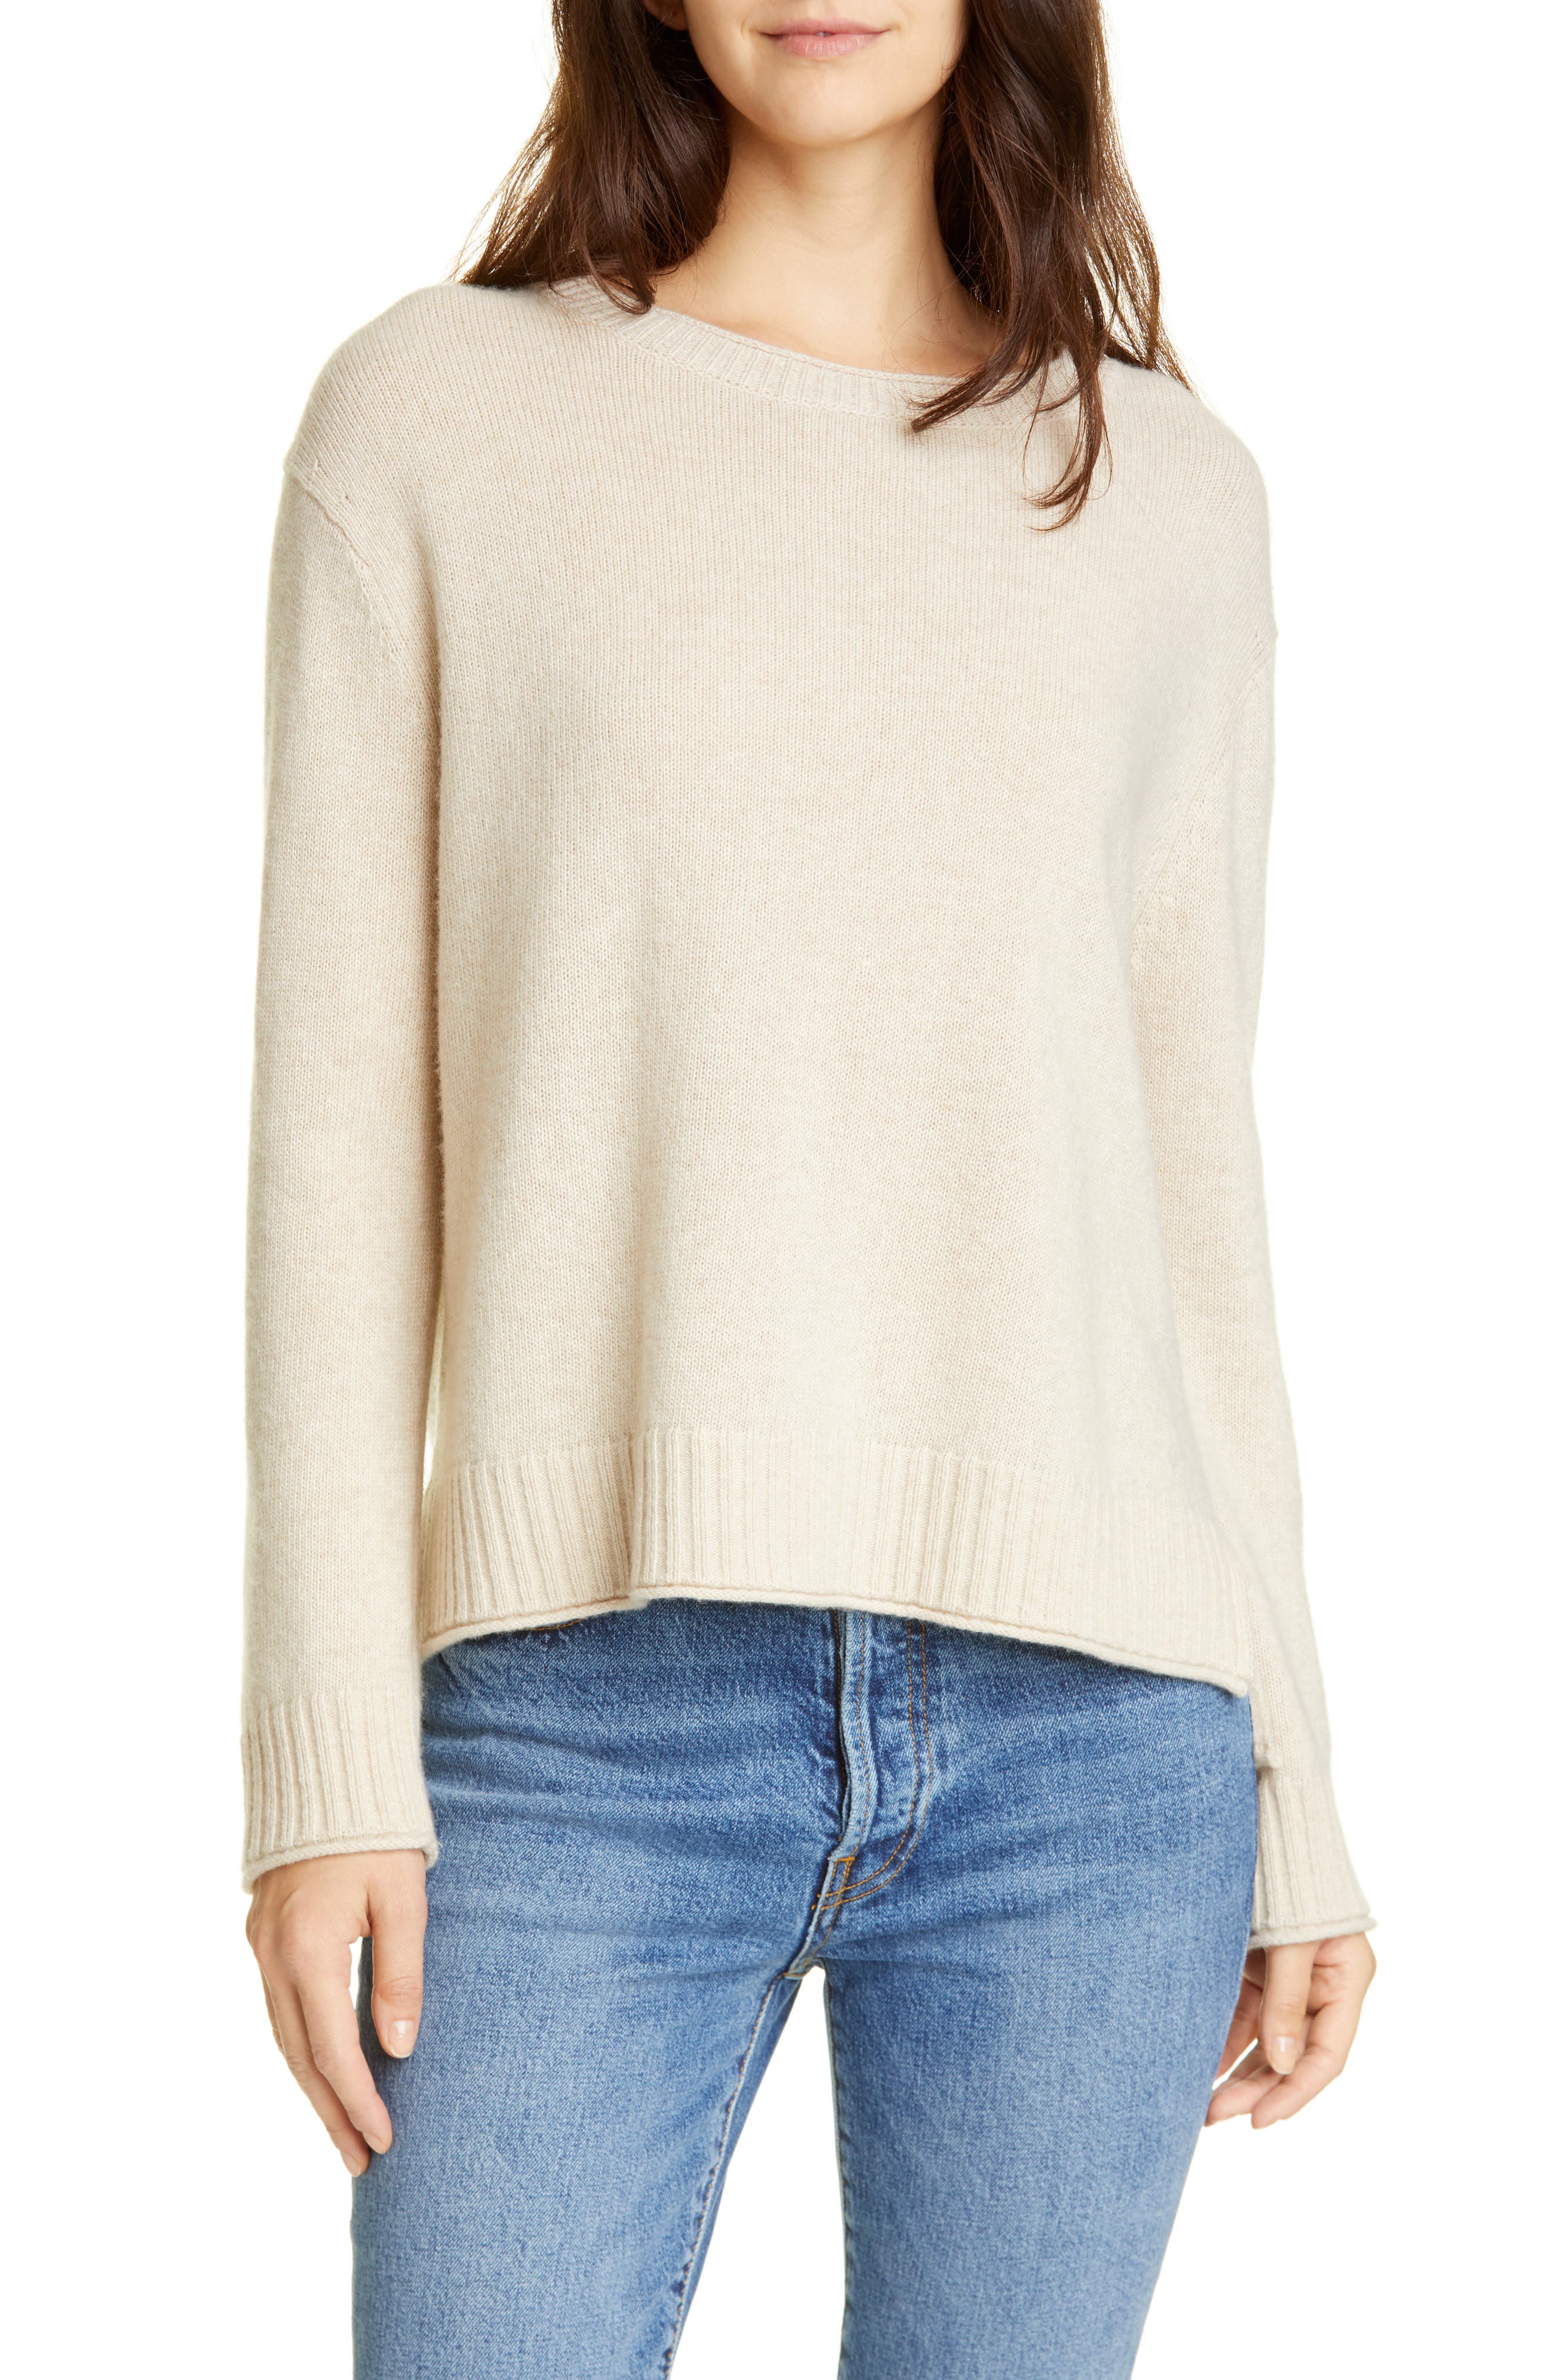 Essentials Womens 100% Cotton Crew Neck Cocoon Cable Sweater 